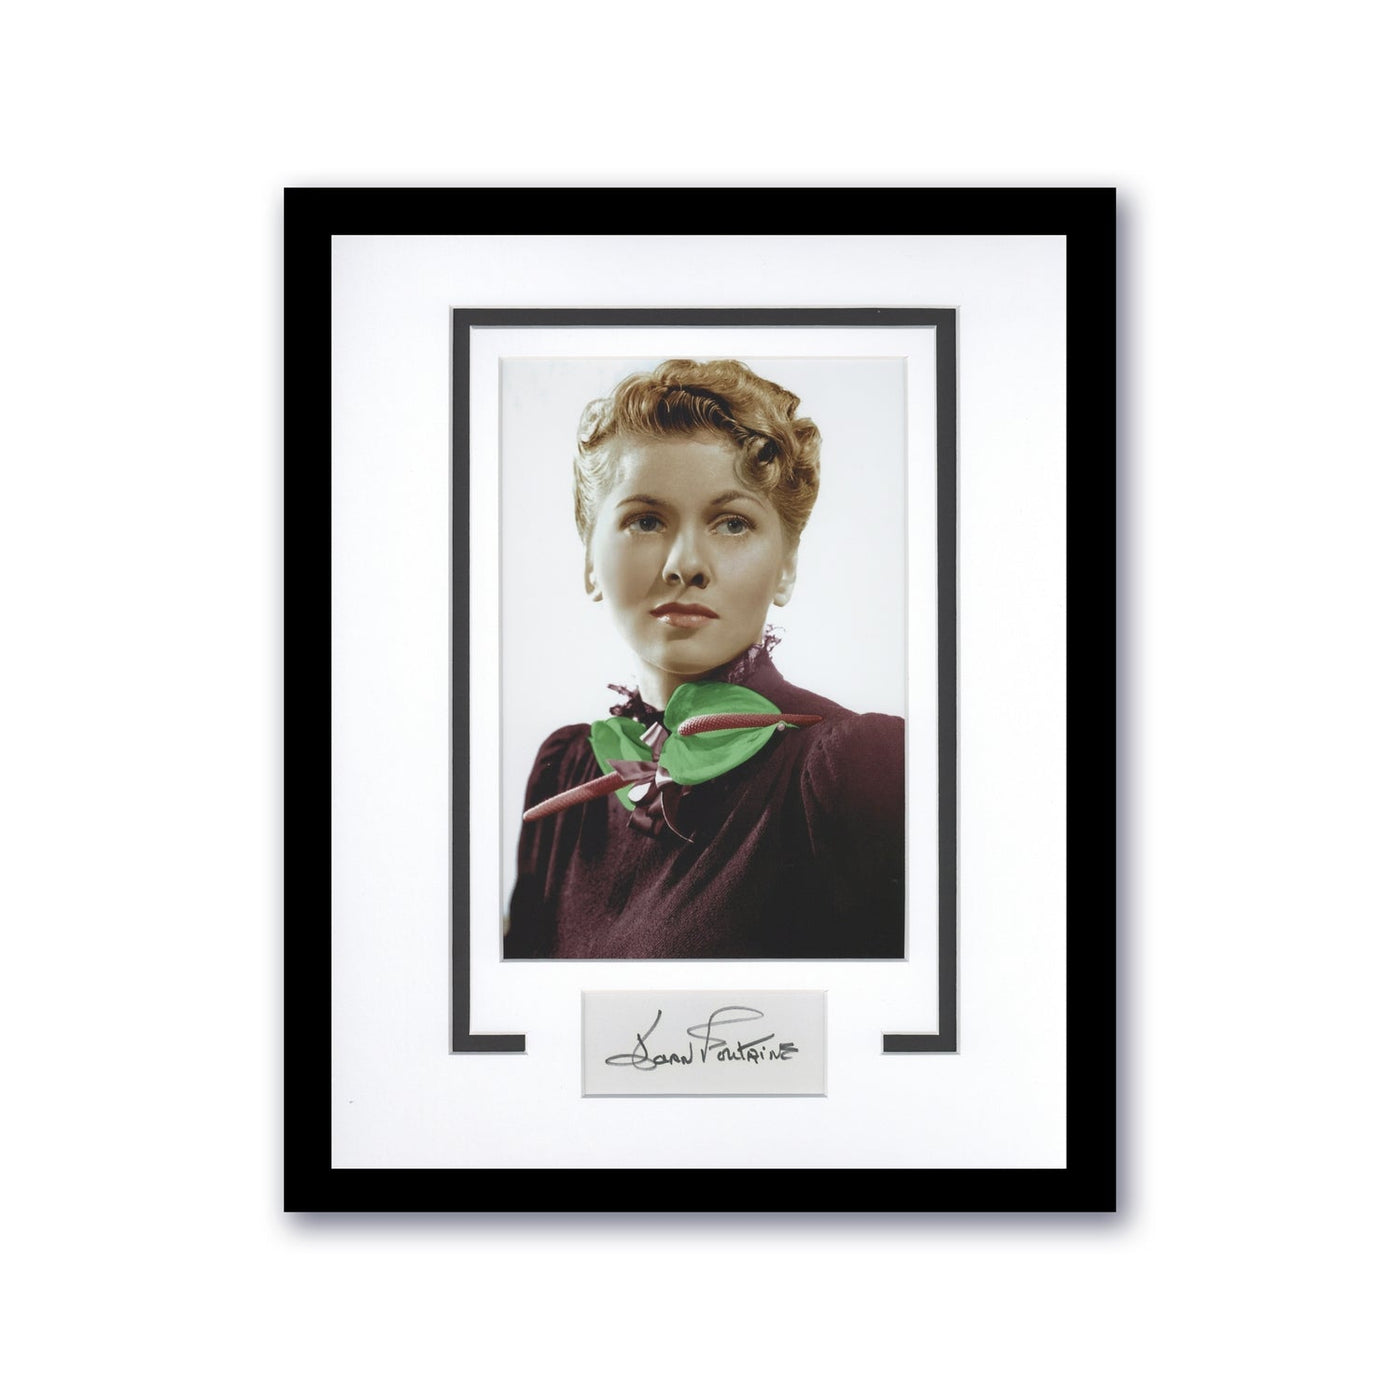 Joan Fontaine Autographed Signed 11x14 Framed Film Movie Actress Photo ACOA